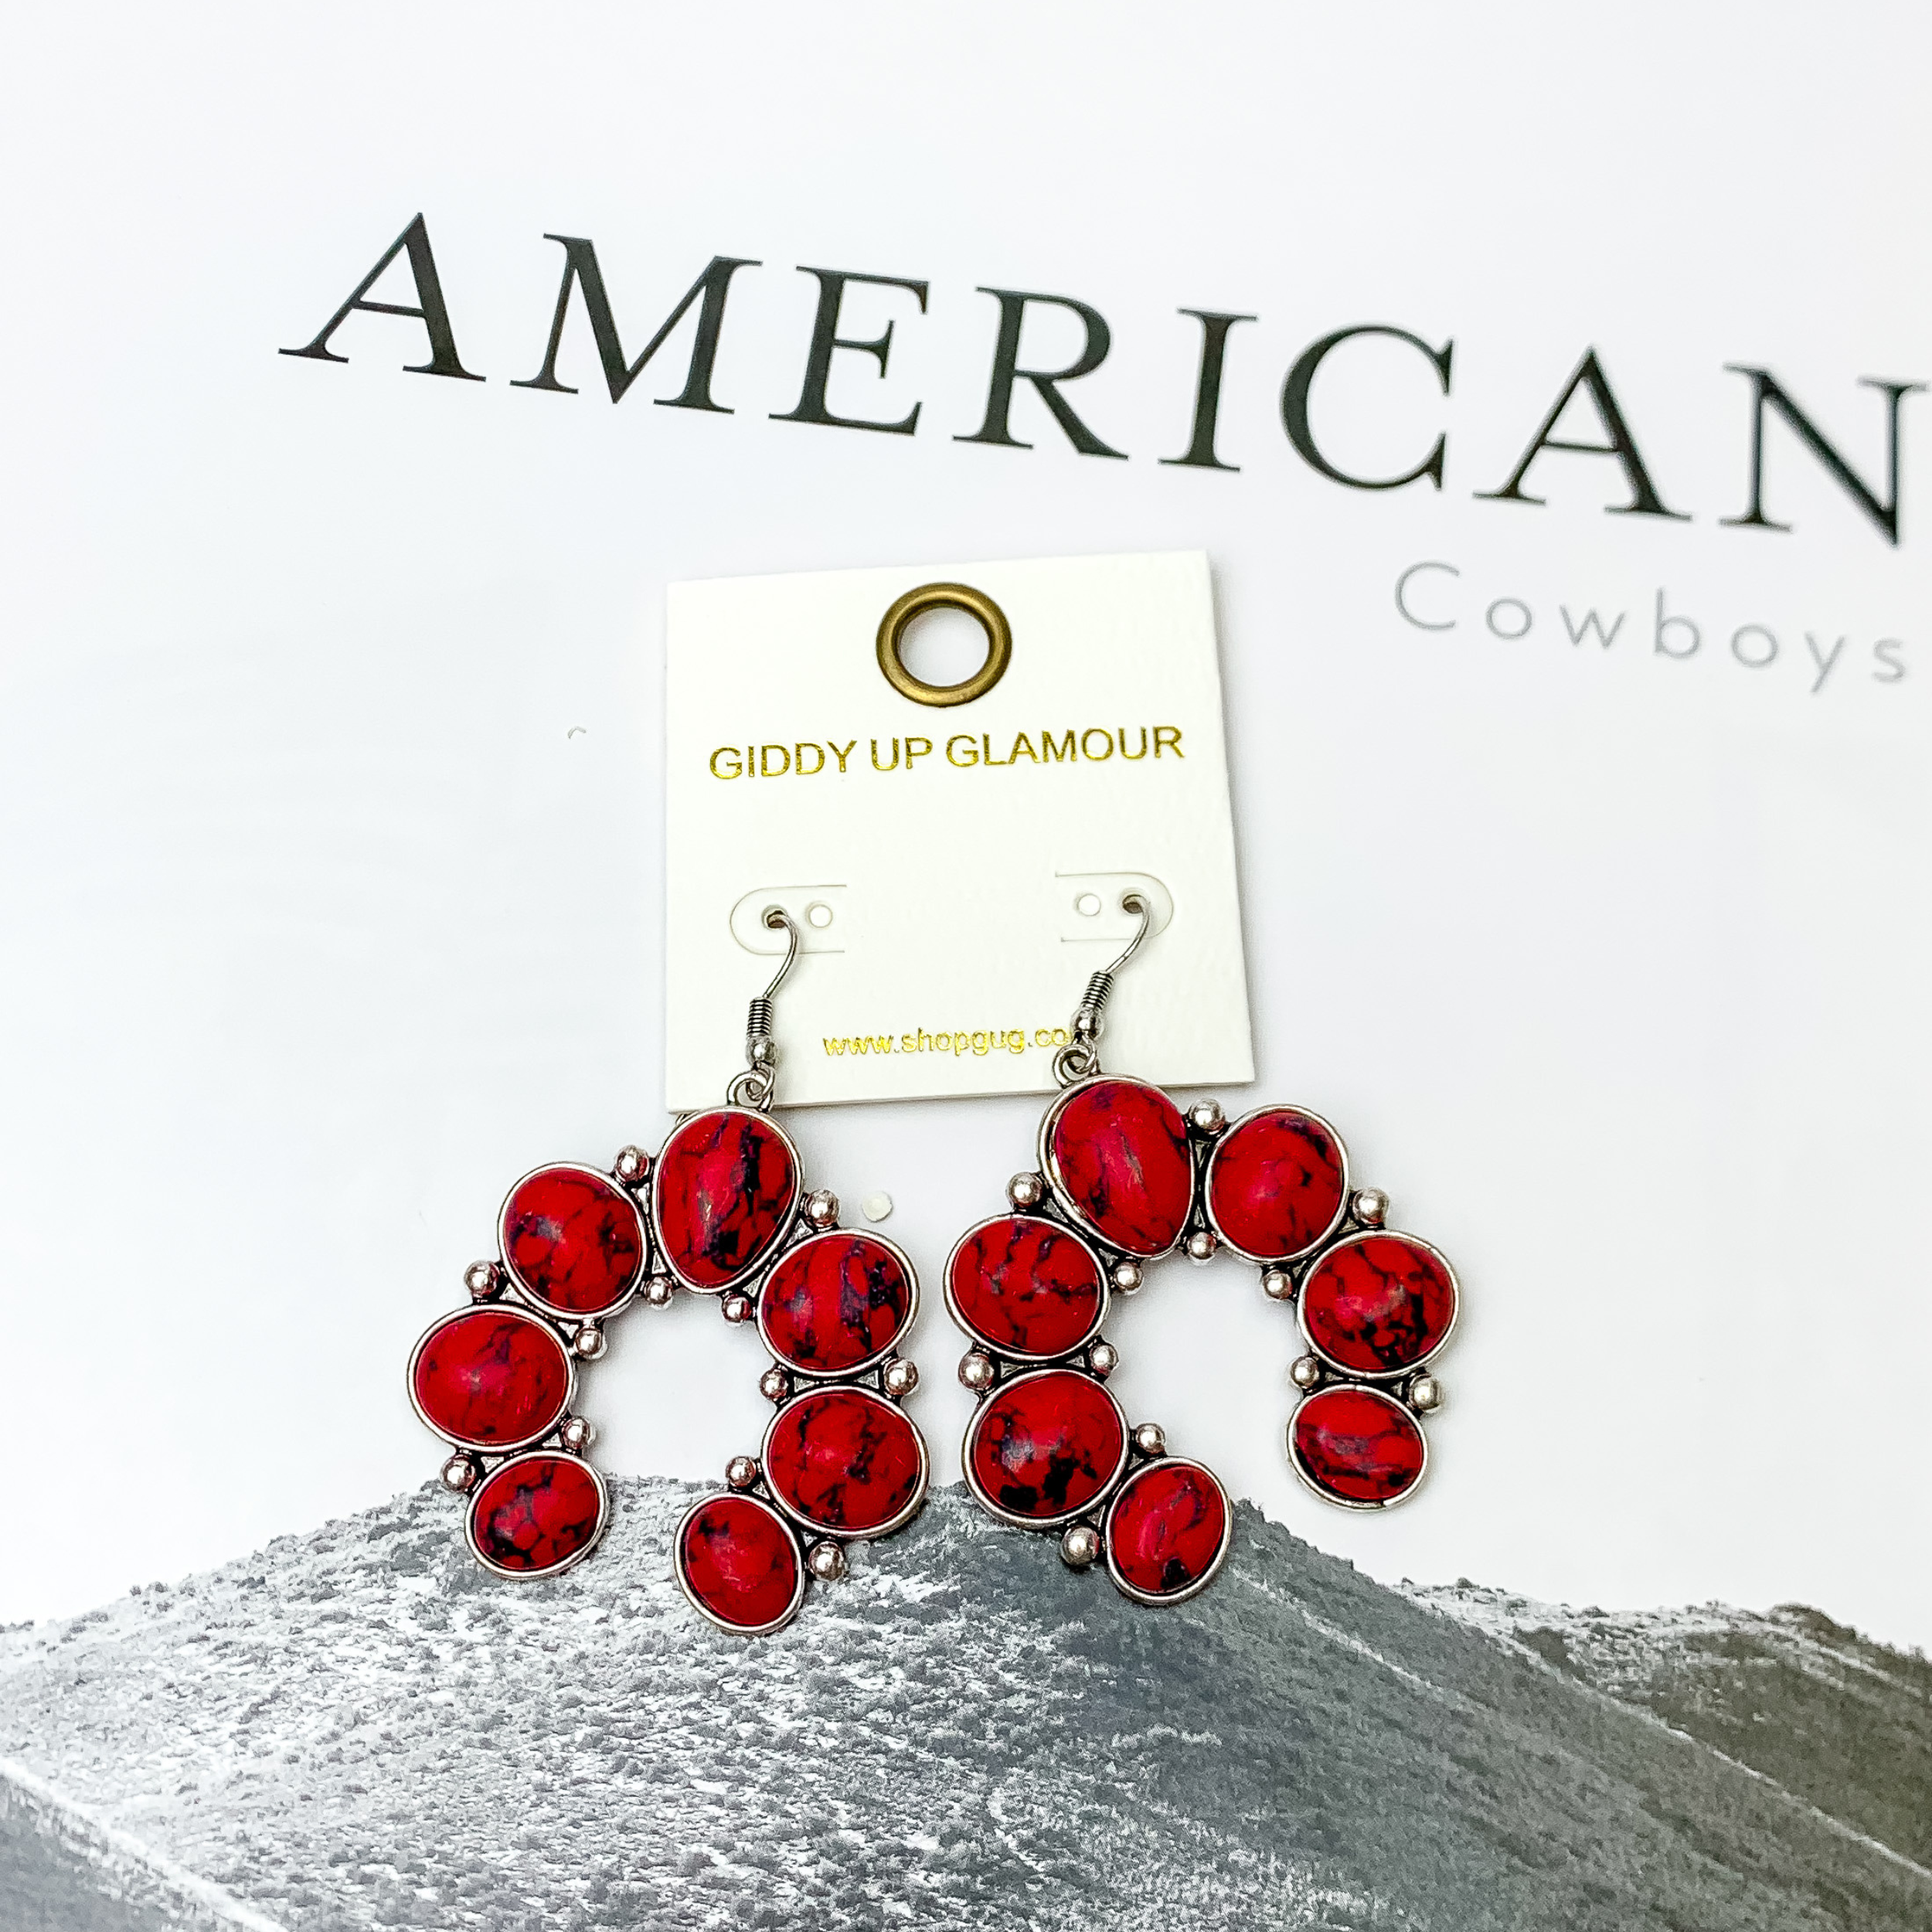 Squash Blossom Stone Earrings In Red. Pictured on a white background with a western scene in the back.